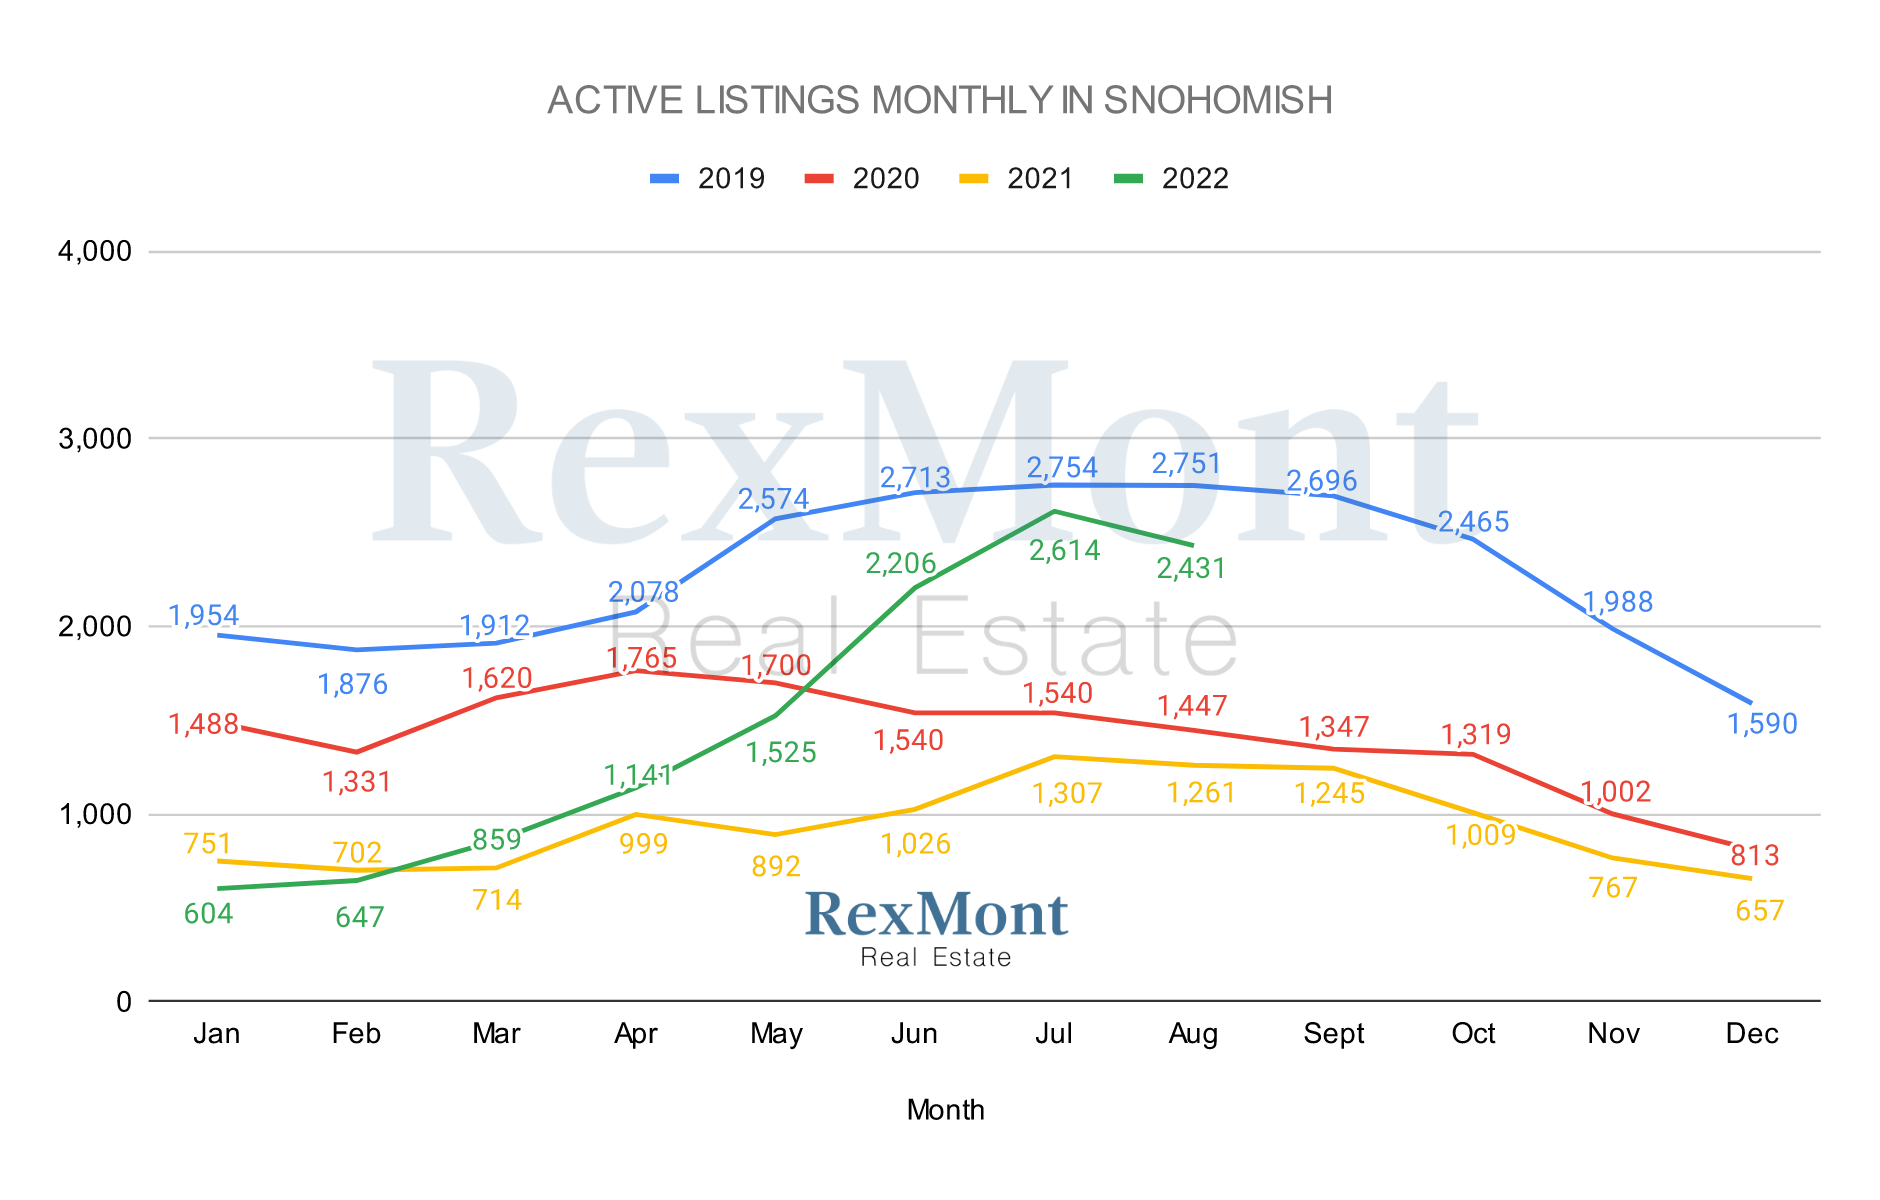 Graph of Active Monthly Real Estate Inventory in Snohomish County